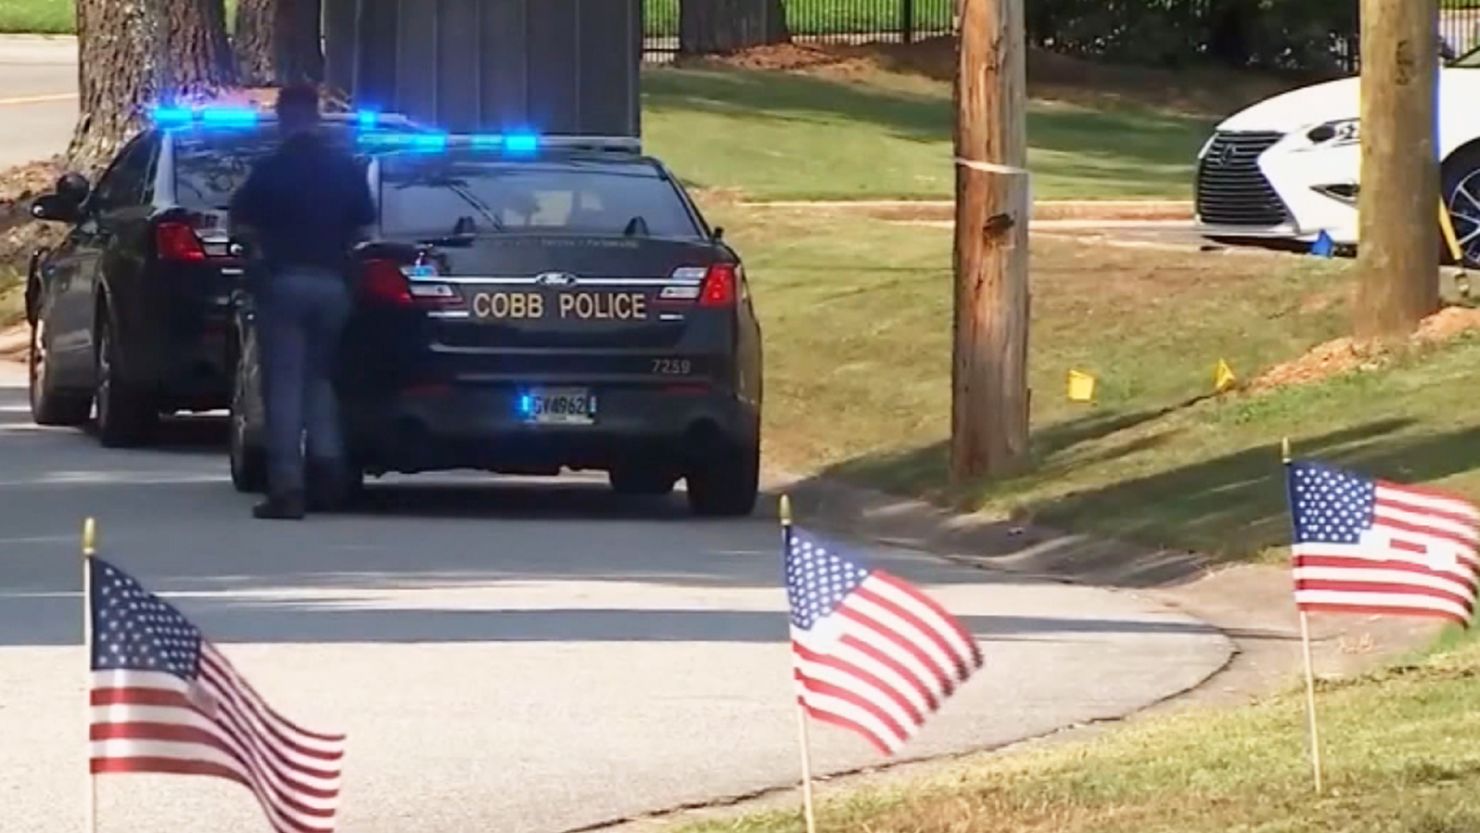 Police near the scene of a shooting in Kennesaw, Georgia.